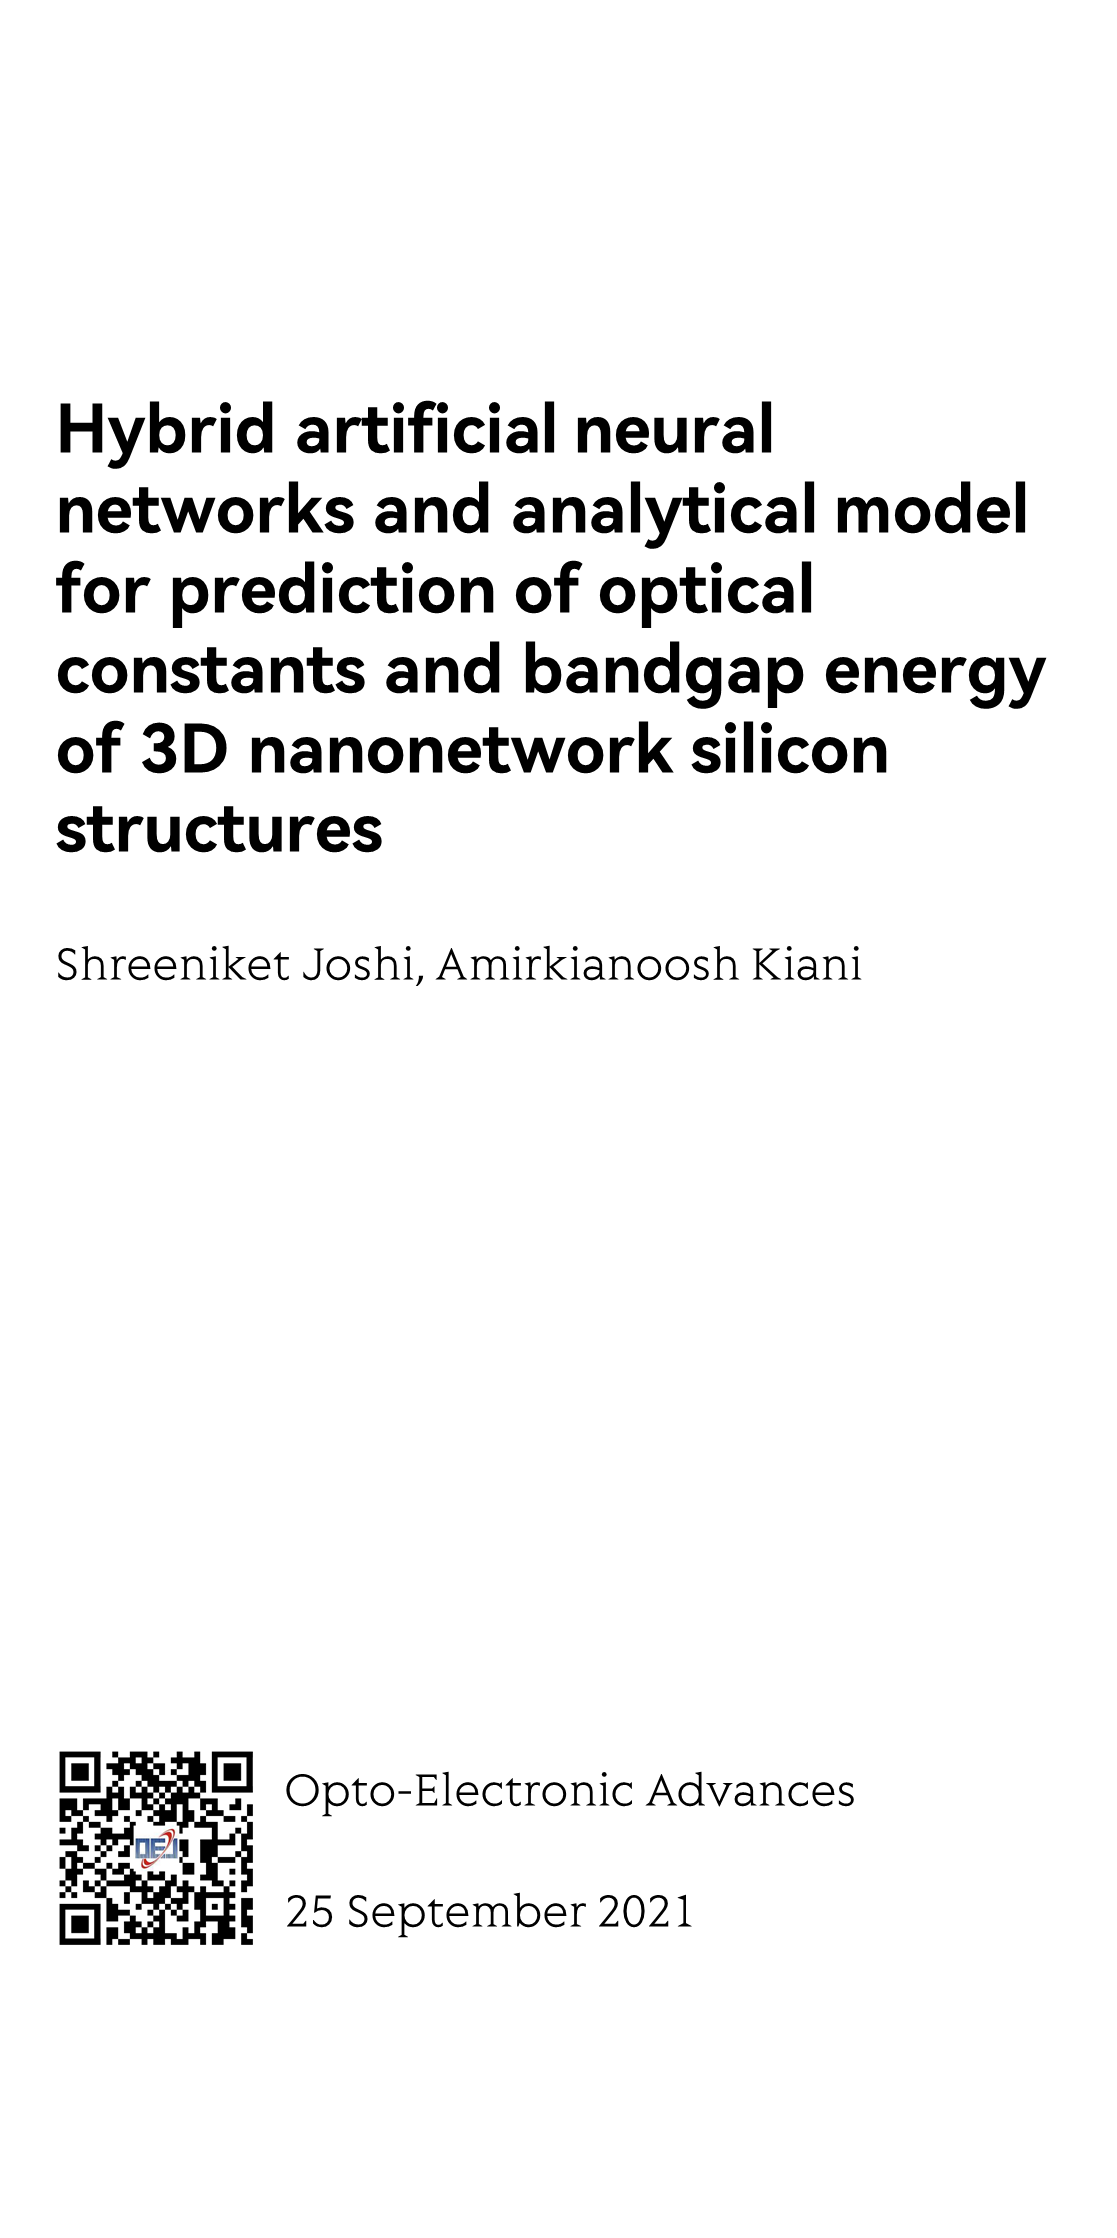 Hybrid artificial neural networks and analytical model for prediction of optical constants and bandgap energy of 3D nanonetwork silicon structures_1